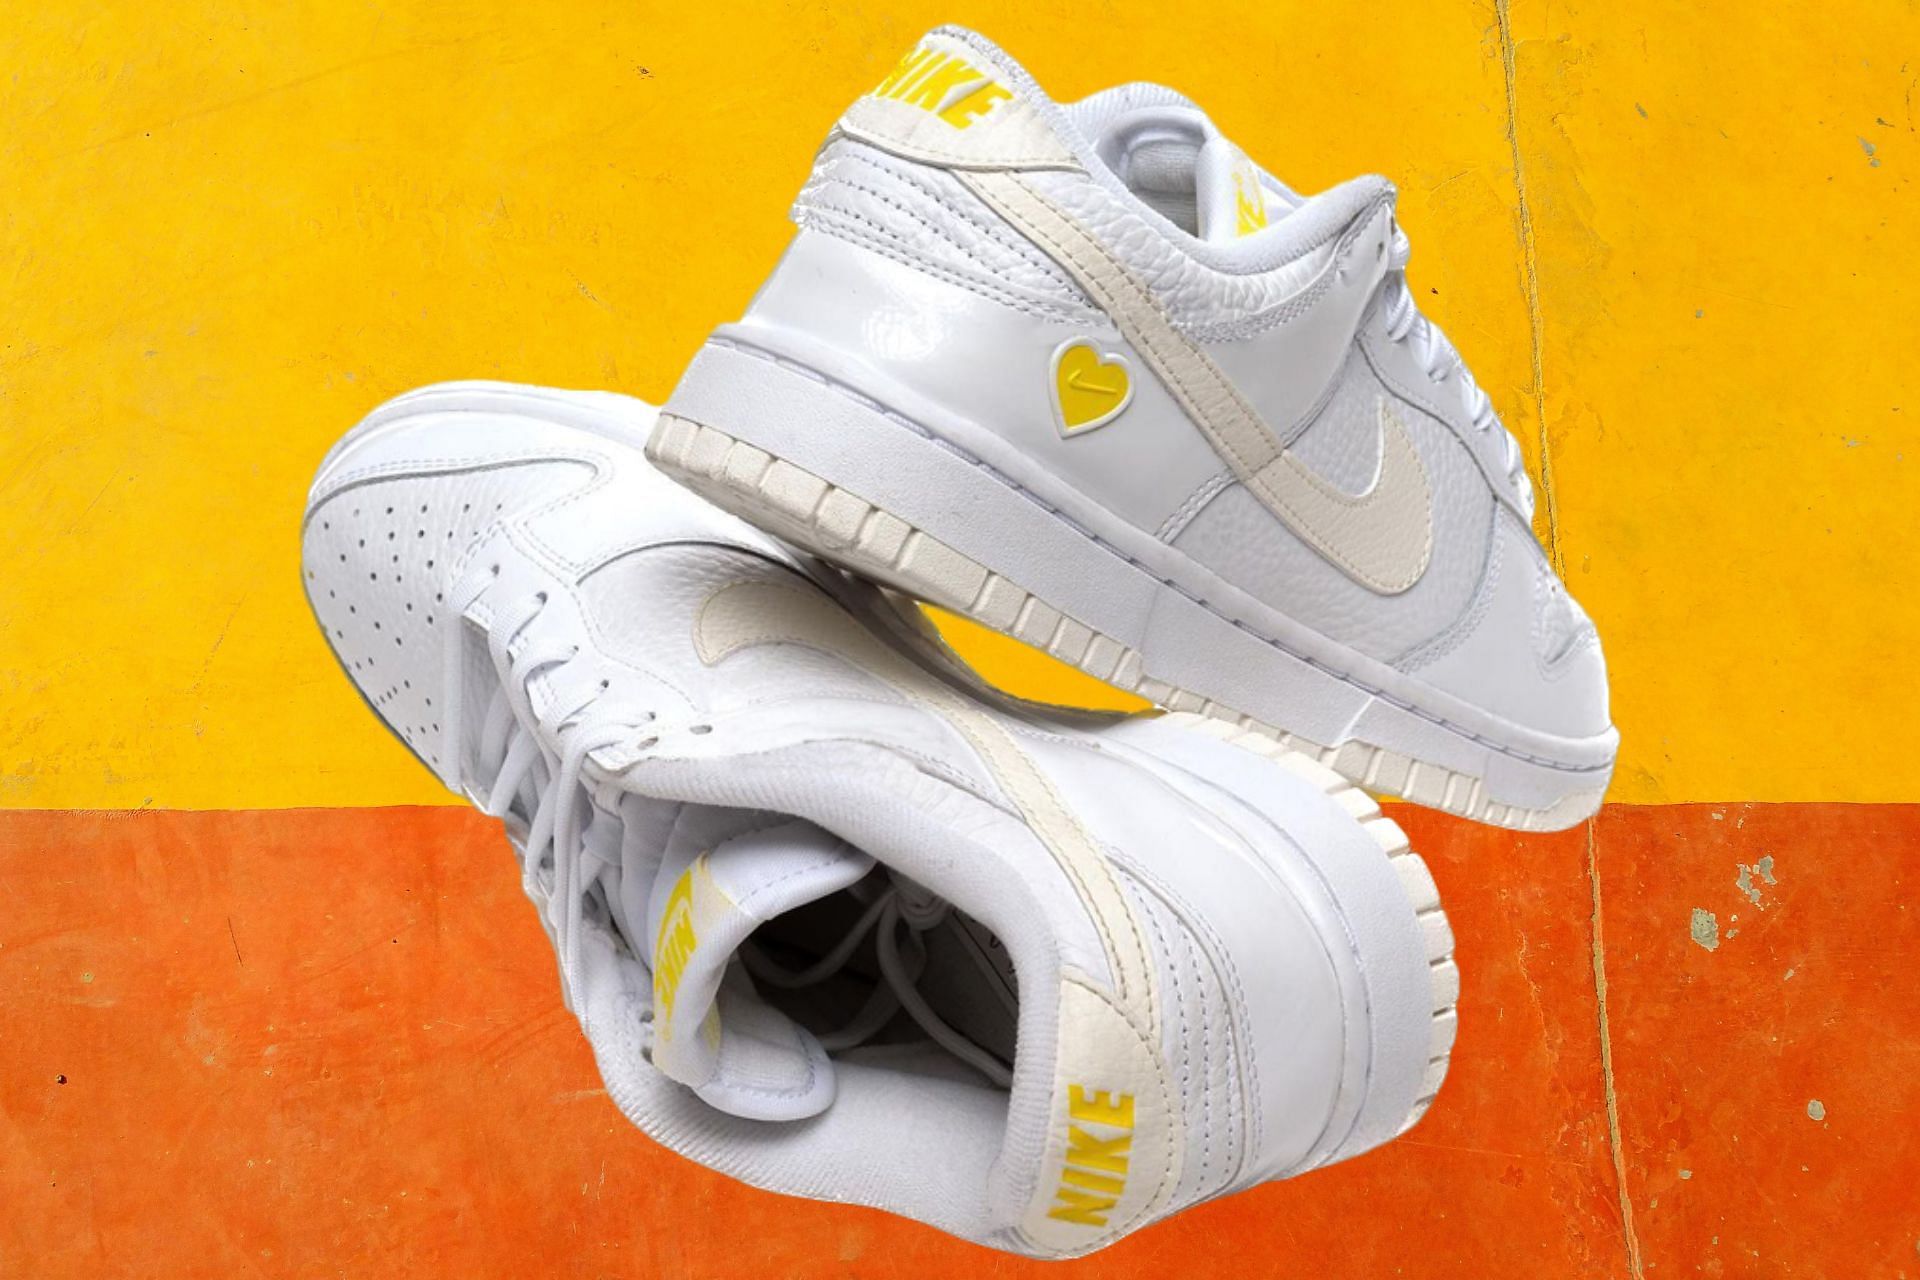 Nike Dunk Low Yellow Heart sneakers (Image via Instagram/@prvt.selection)